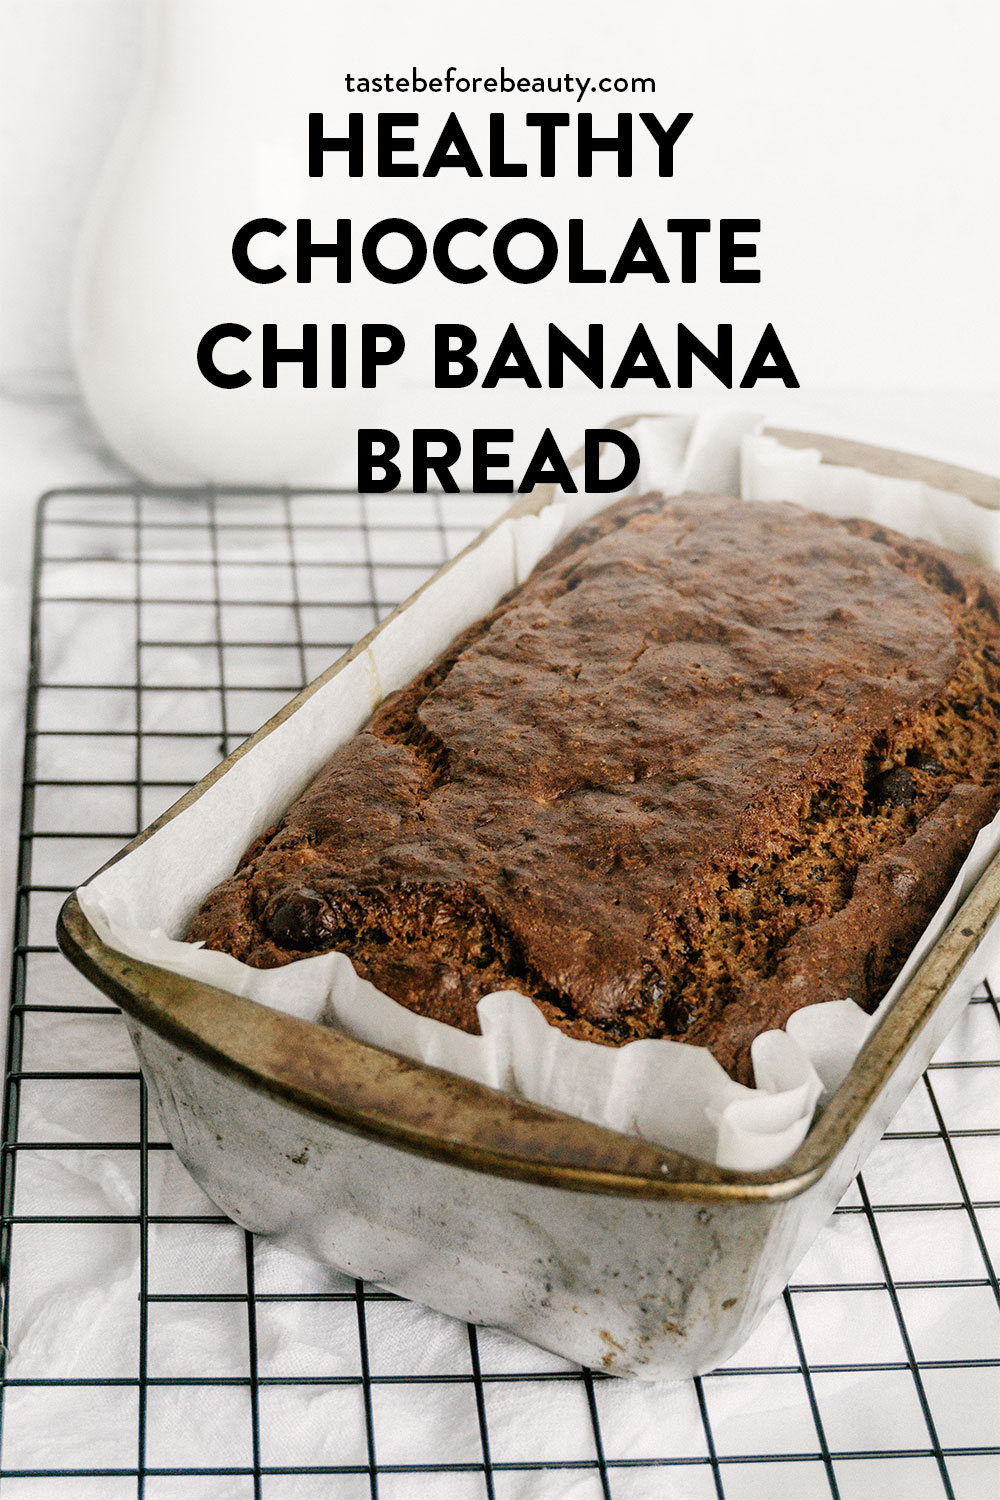 taste before beauty healthy chocolate chip banana bread in pan on cooling wire pinterest pin